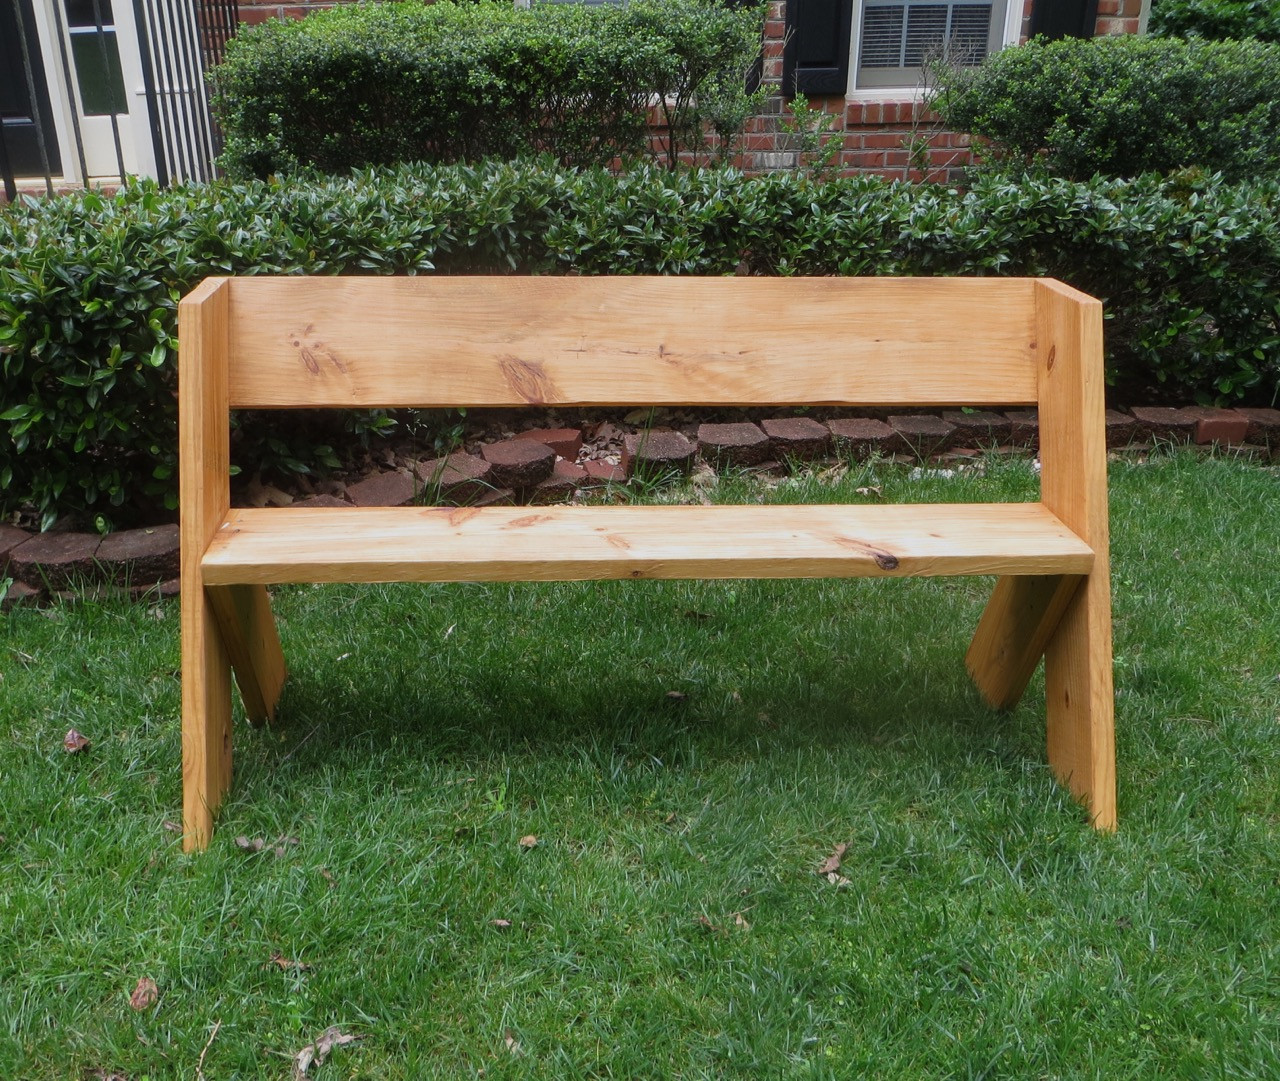 DIY Outdoor Wood Bench
 The Project Lady DIY Tutorial $16 Simple Outdoor Wood Bench